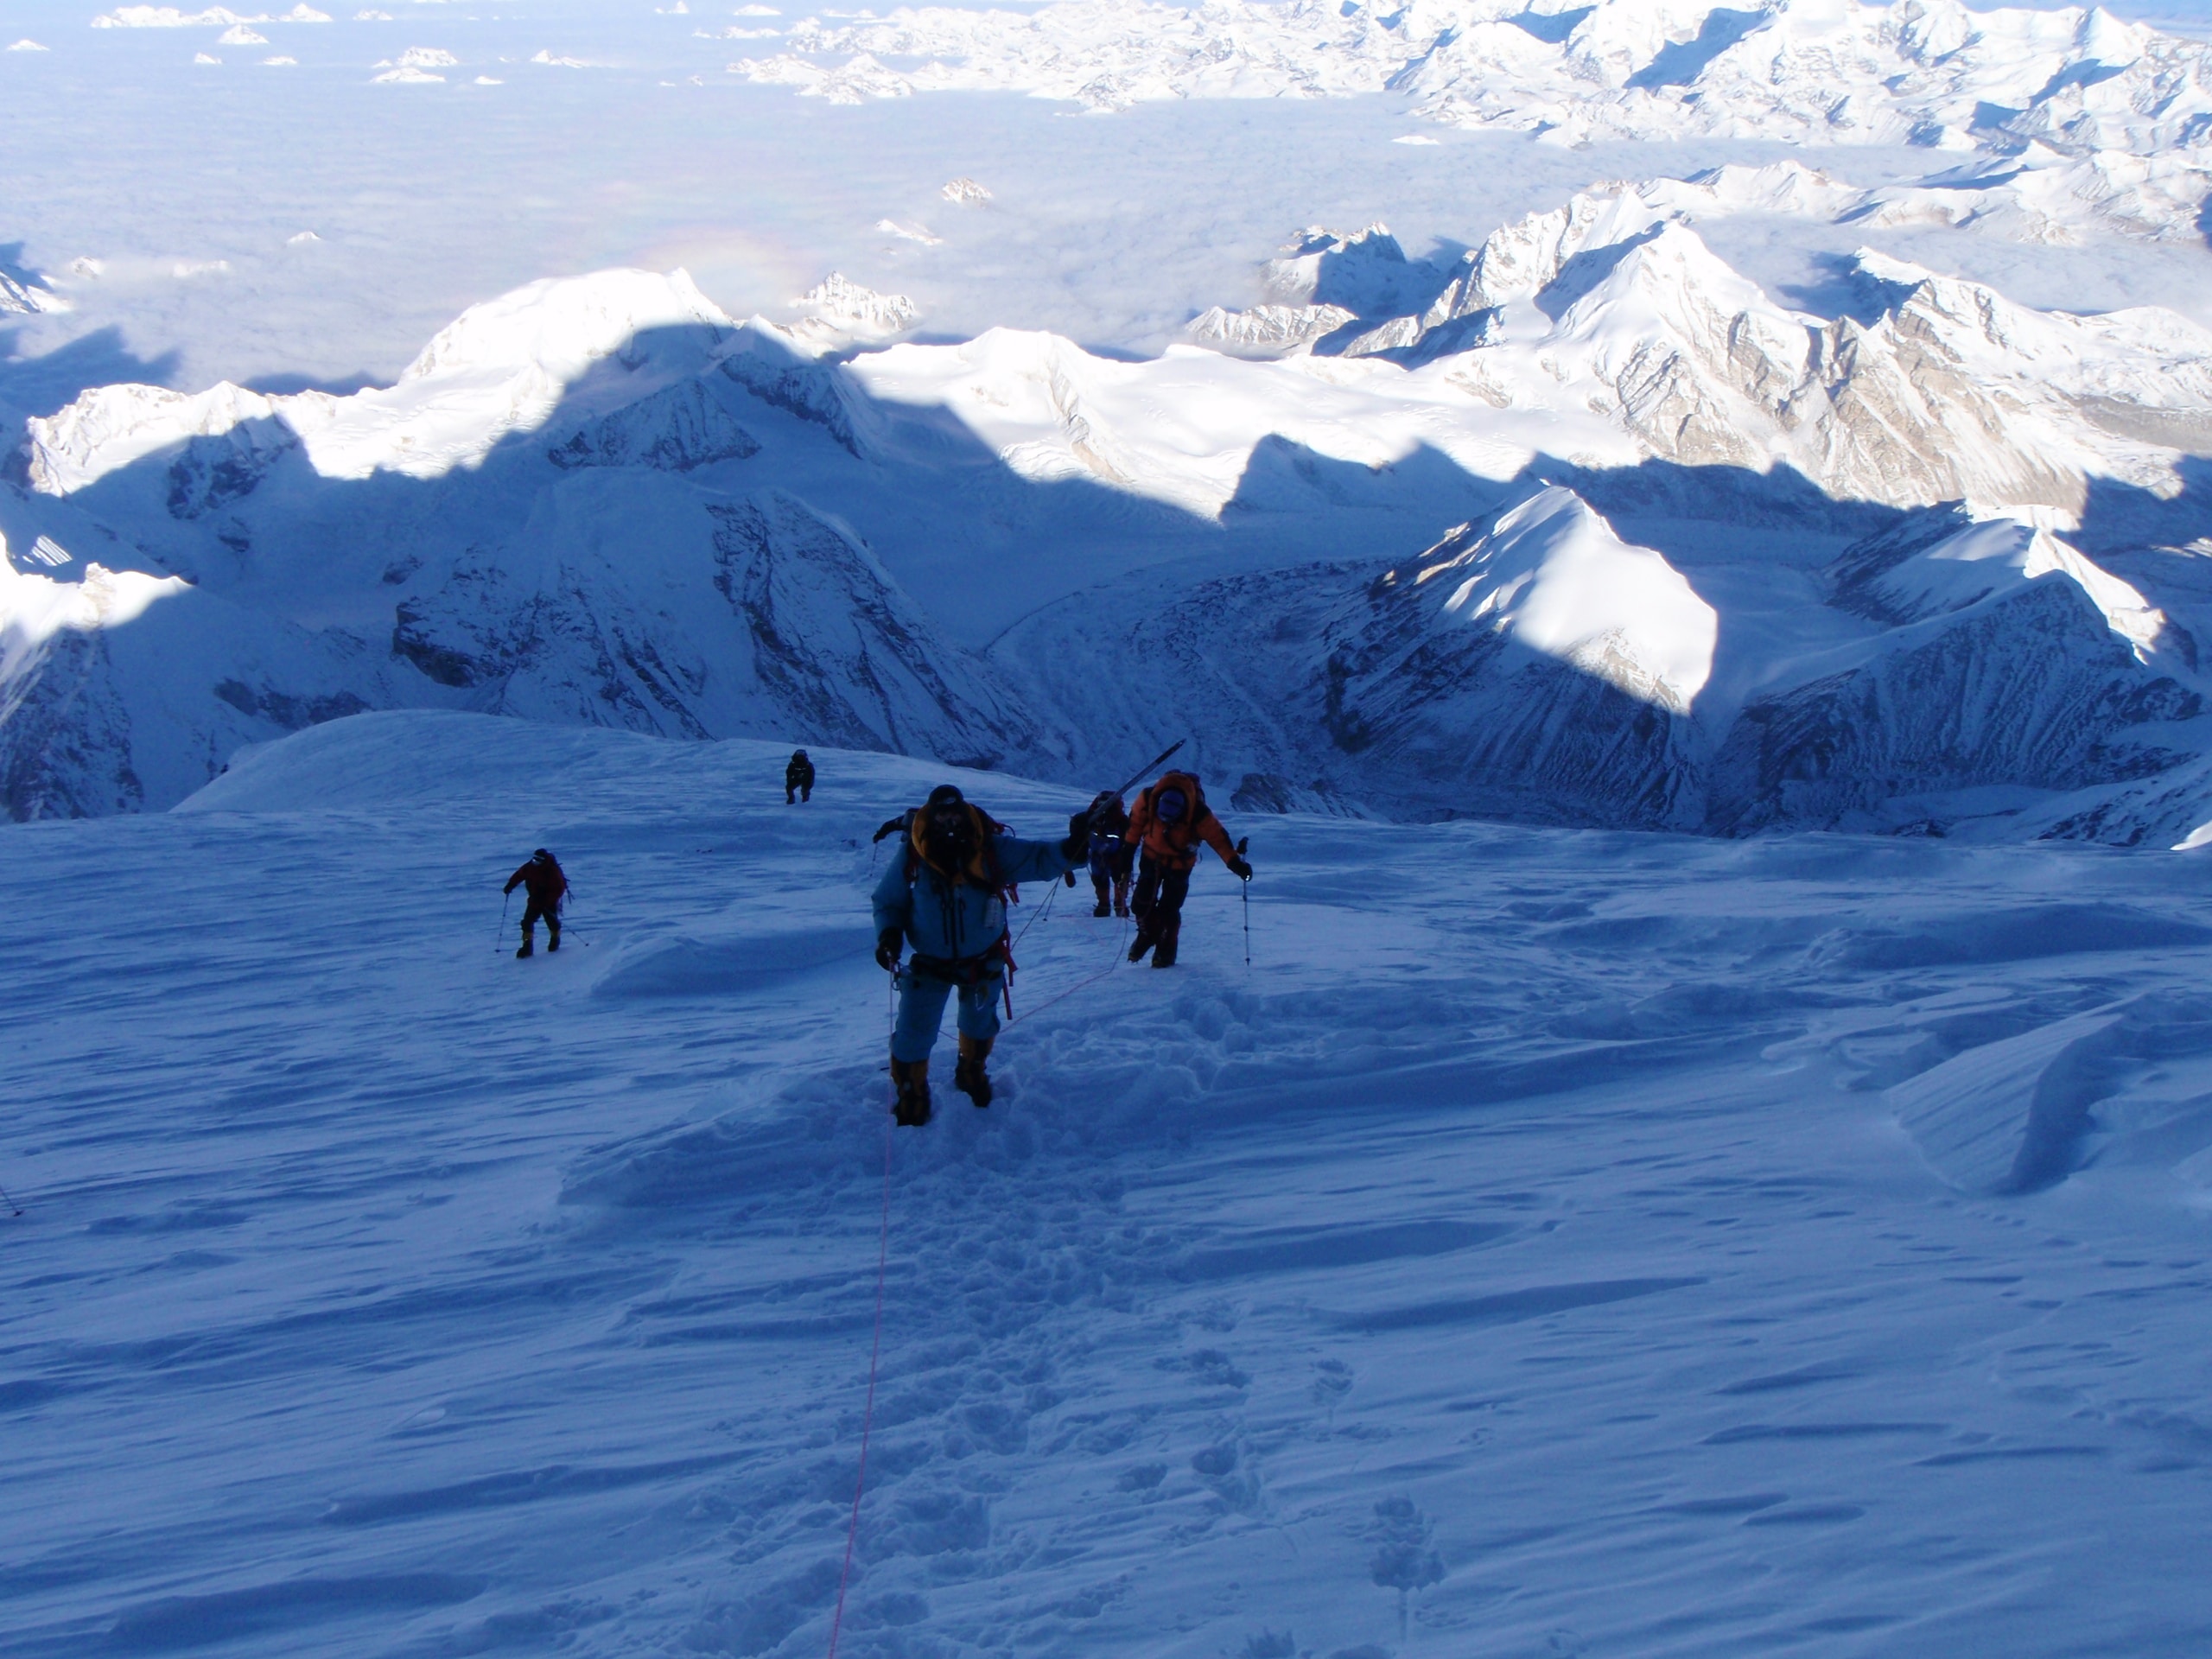 The final slope to the summit of Cho Oyu